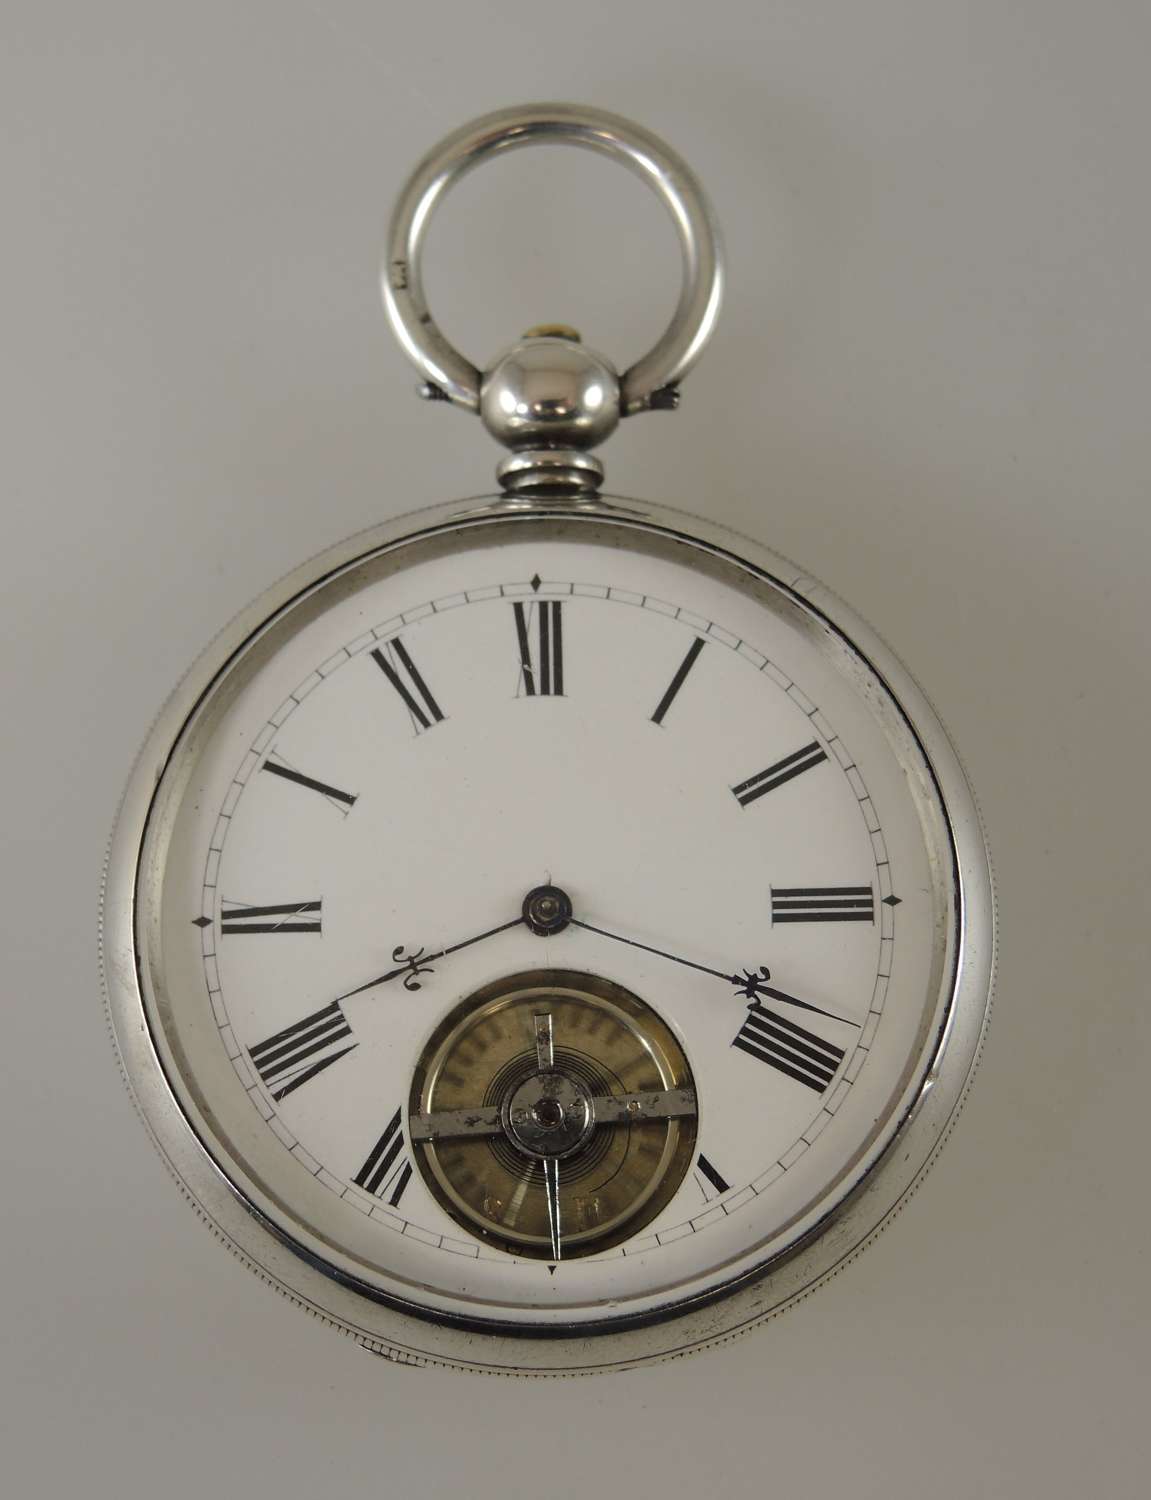 Unusual silver pocket watch with inverted visible balance c1870